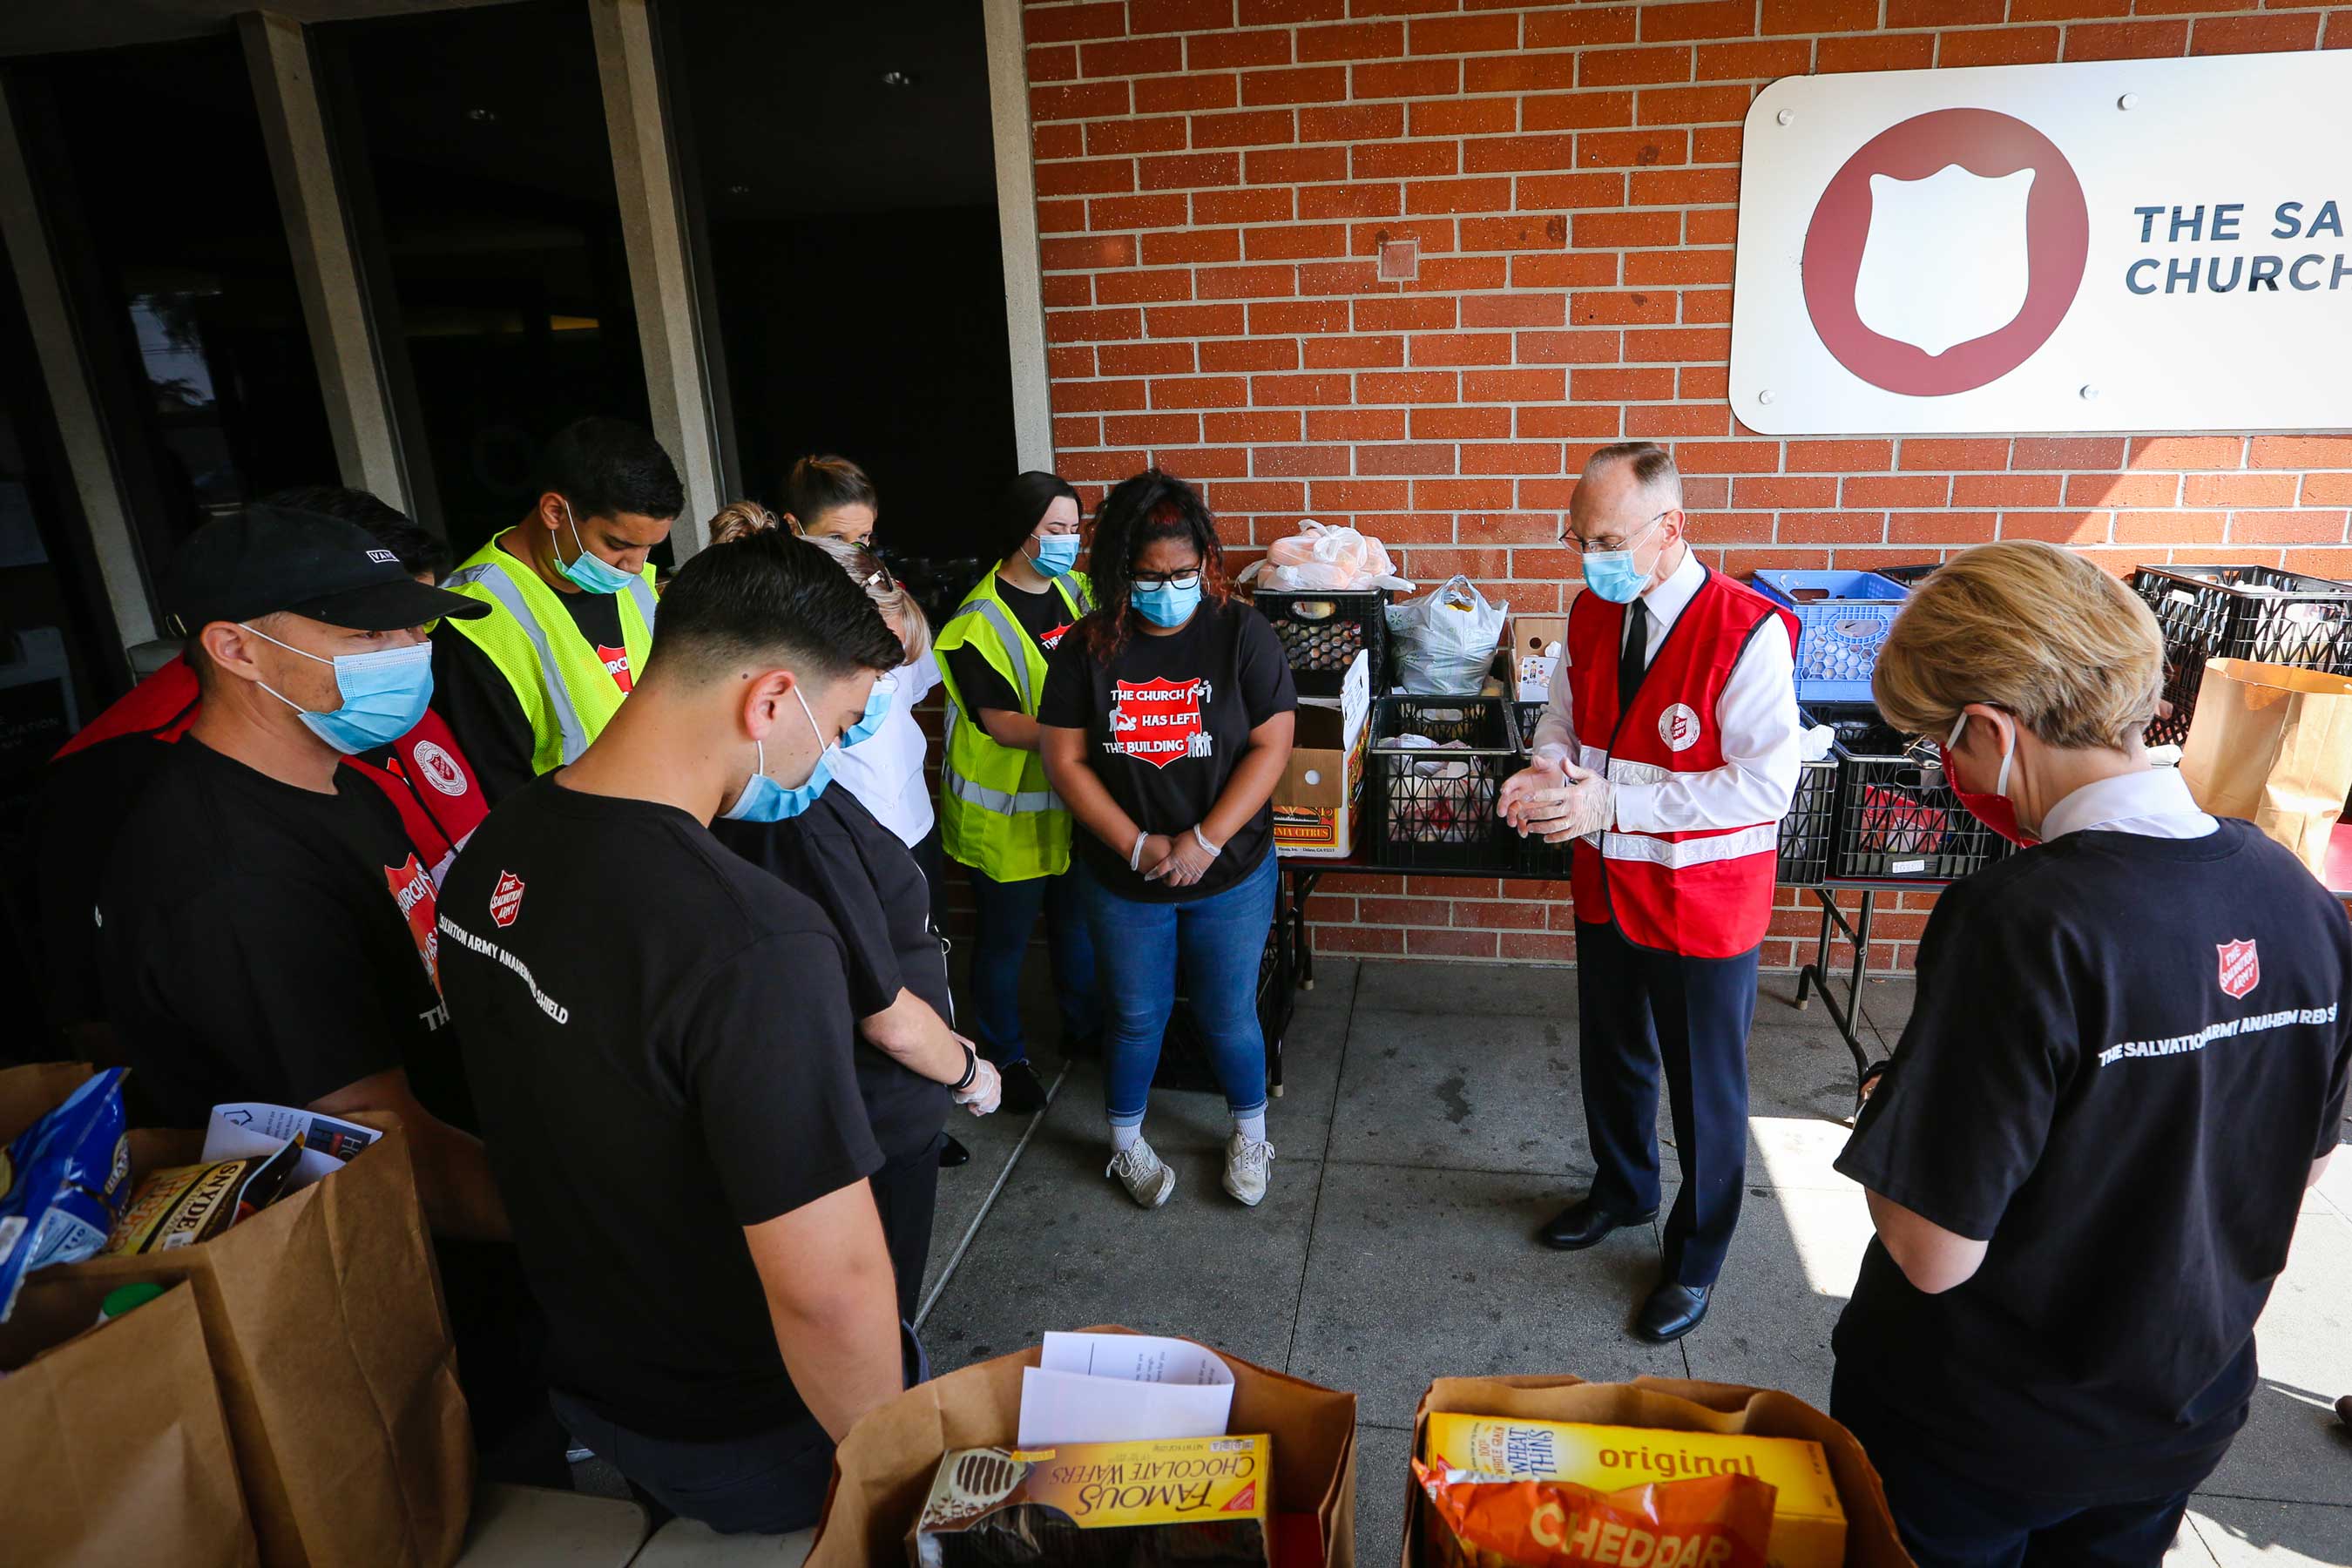 The Salvation Army USA Sets Out to “Rescue Christmas” Due to Immense Impact